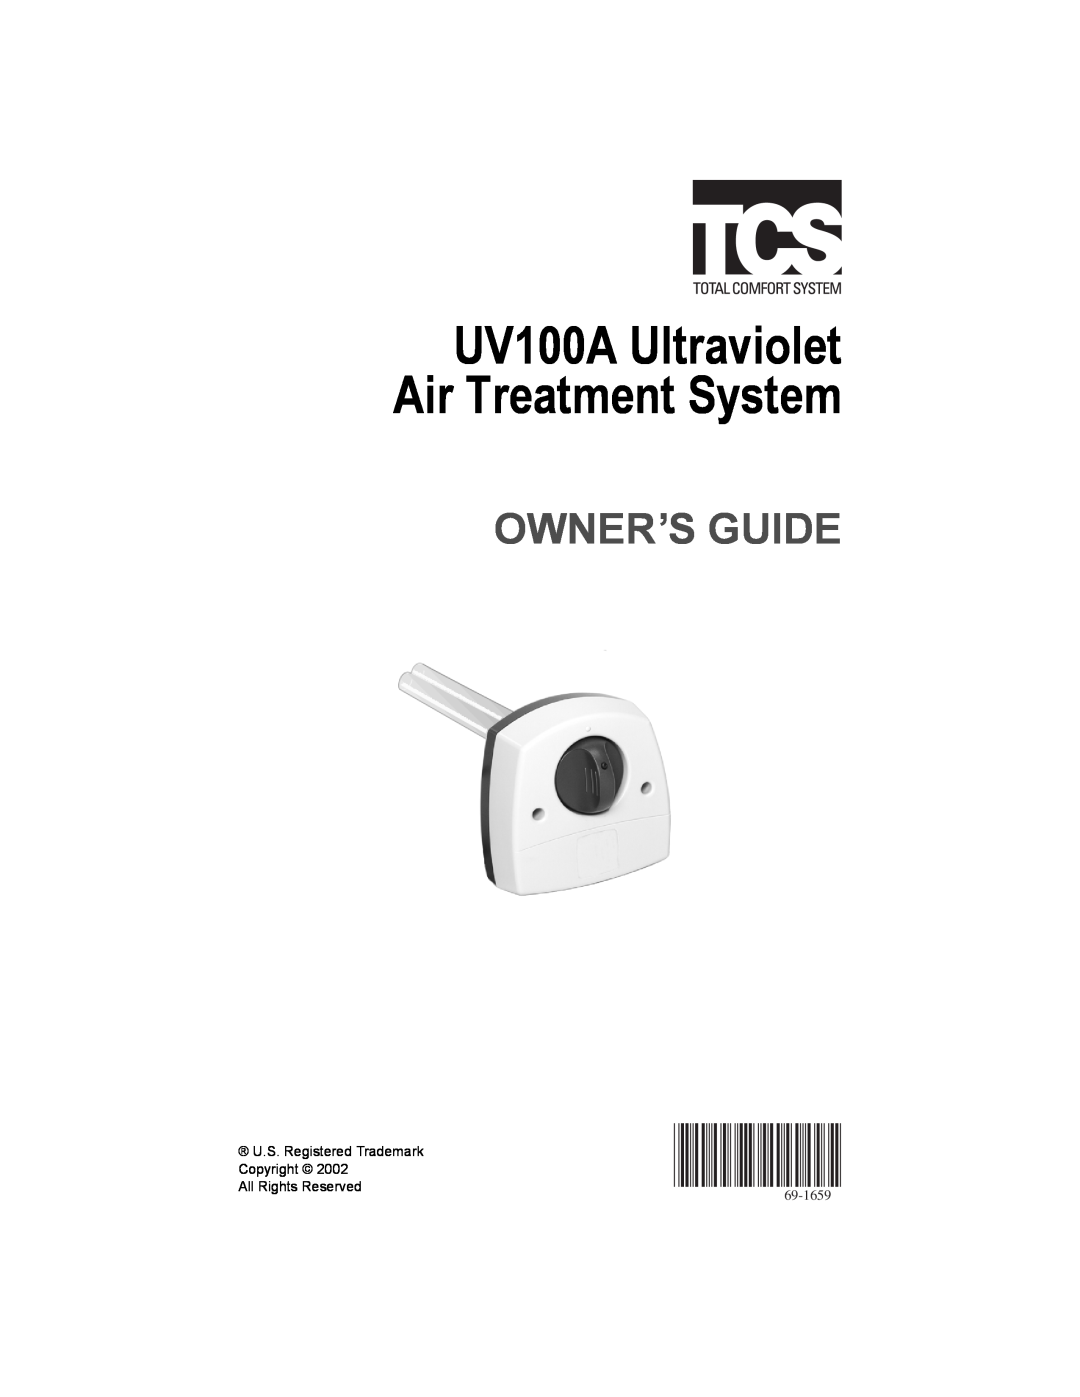 York 69-1659 UV100A manual UV100A Ultraviolet Air Treatment System, Owner’S Guide, U.S. Registered Trademark, Copyright 